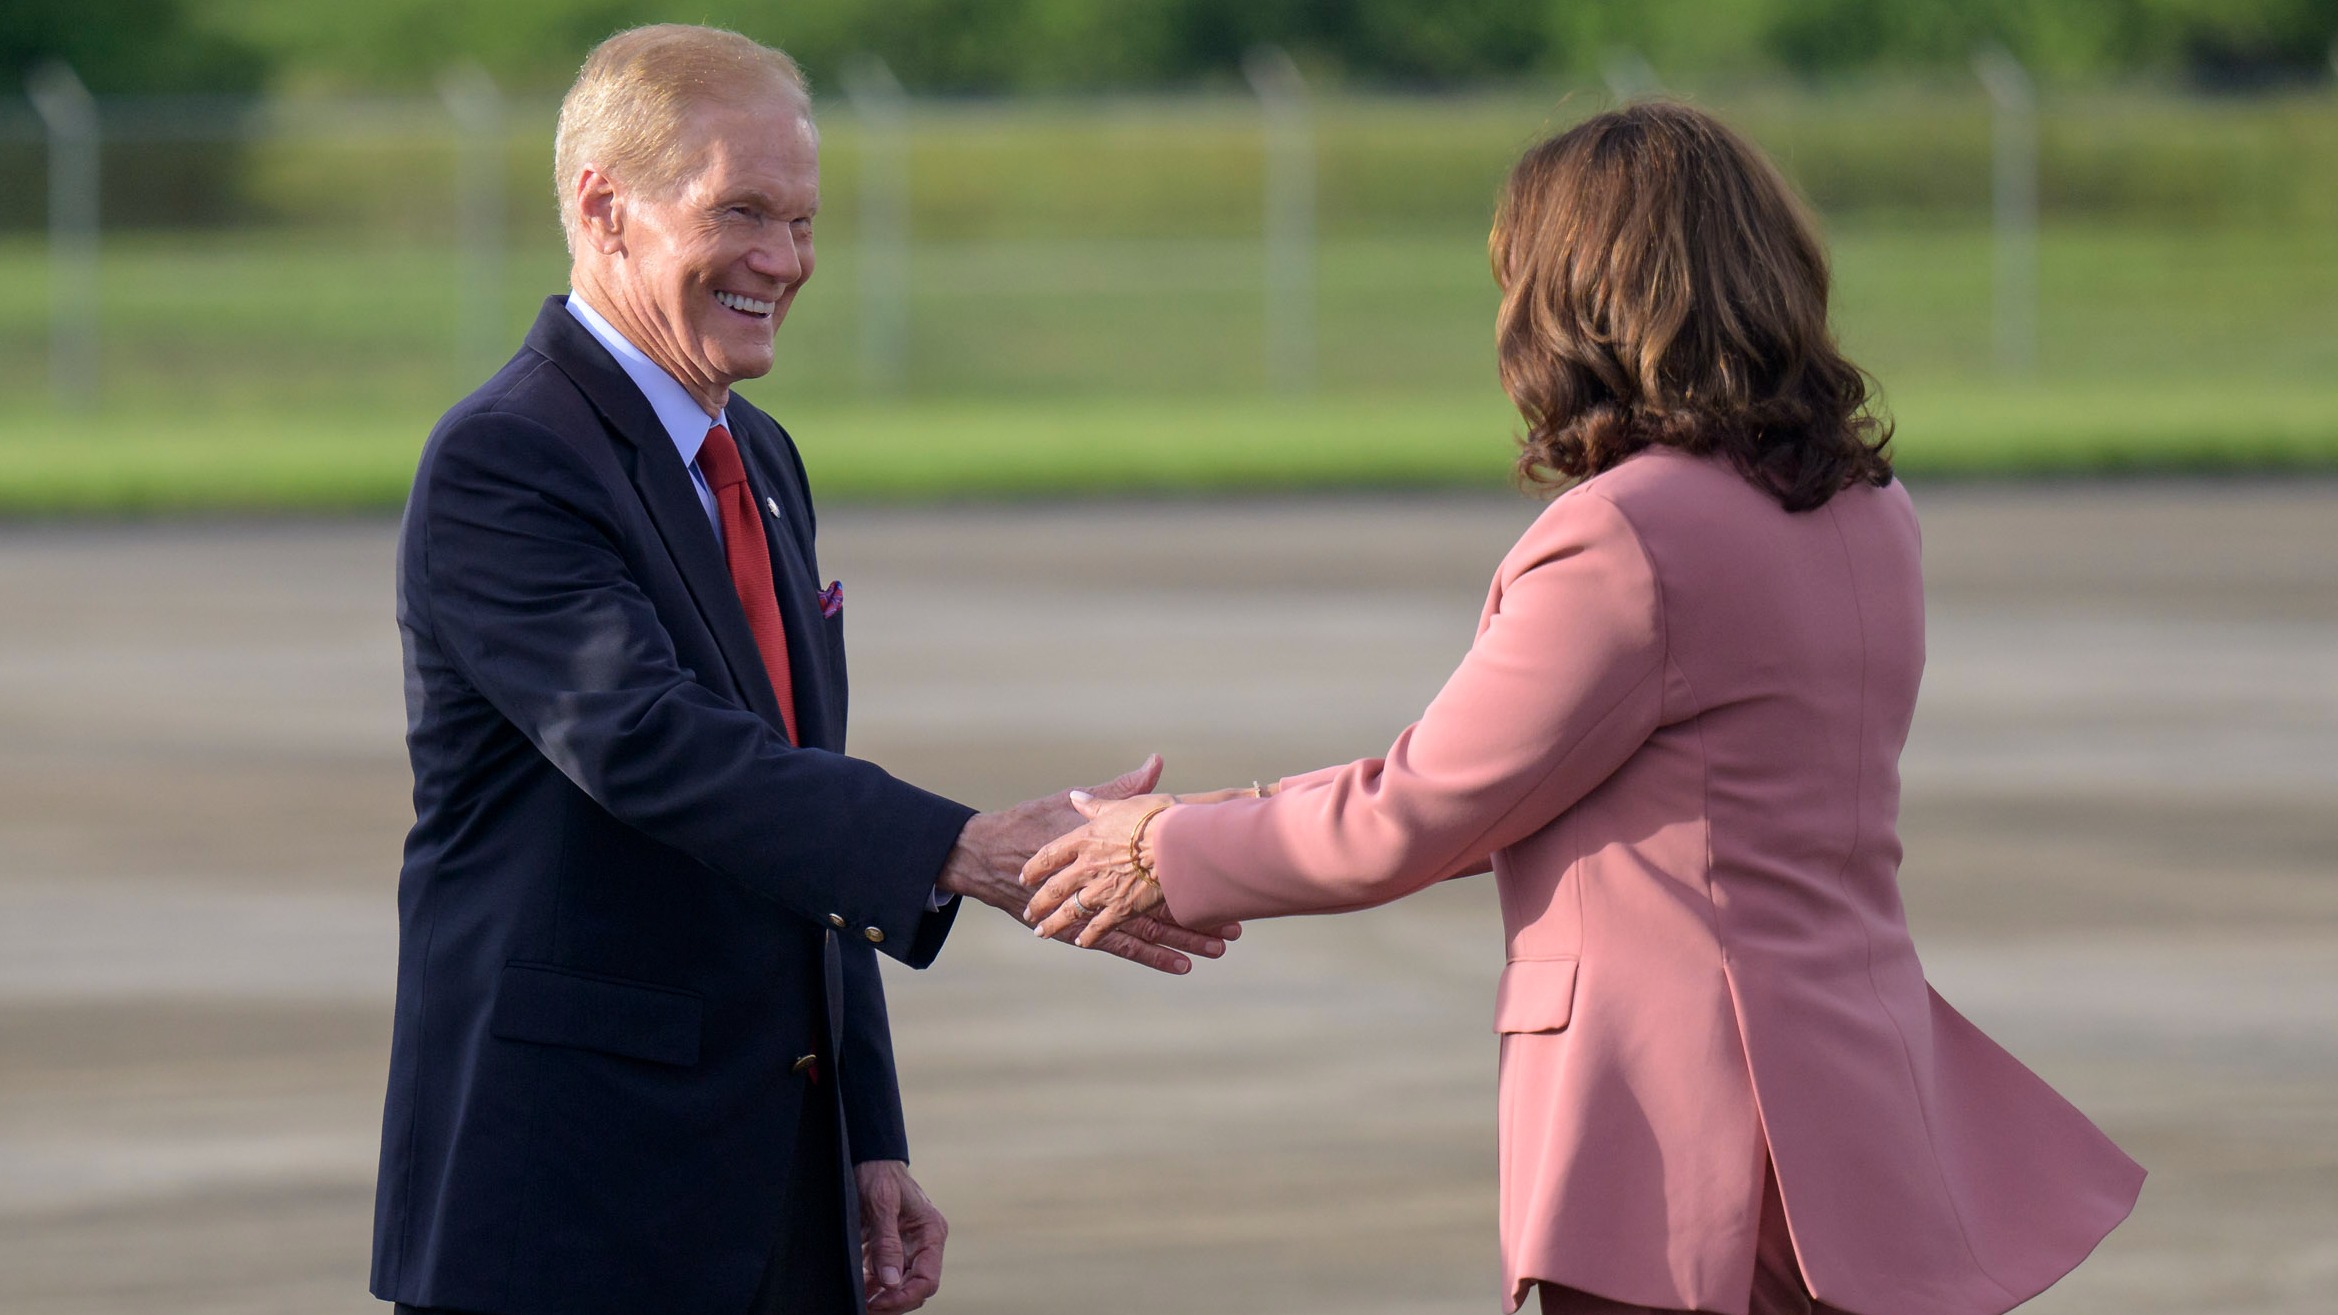 nasa administrator bill nelson in a suit shakes hands with vice president kamala harris in a pink blazer